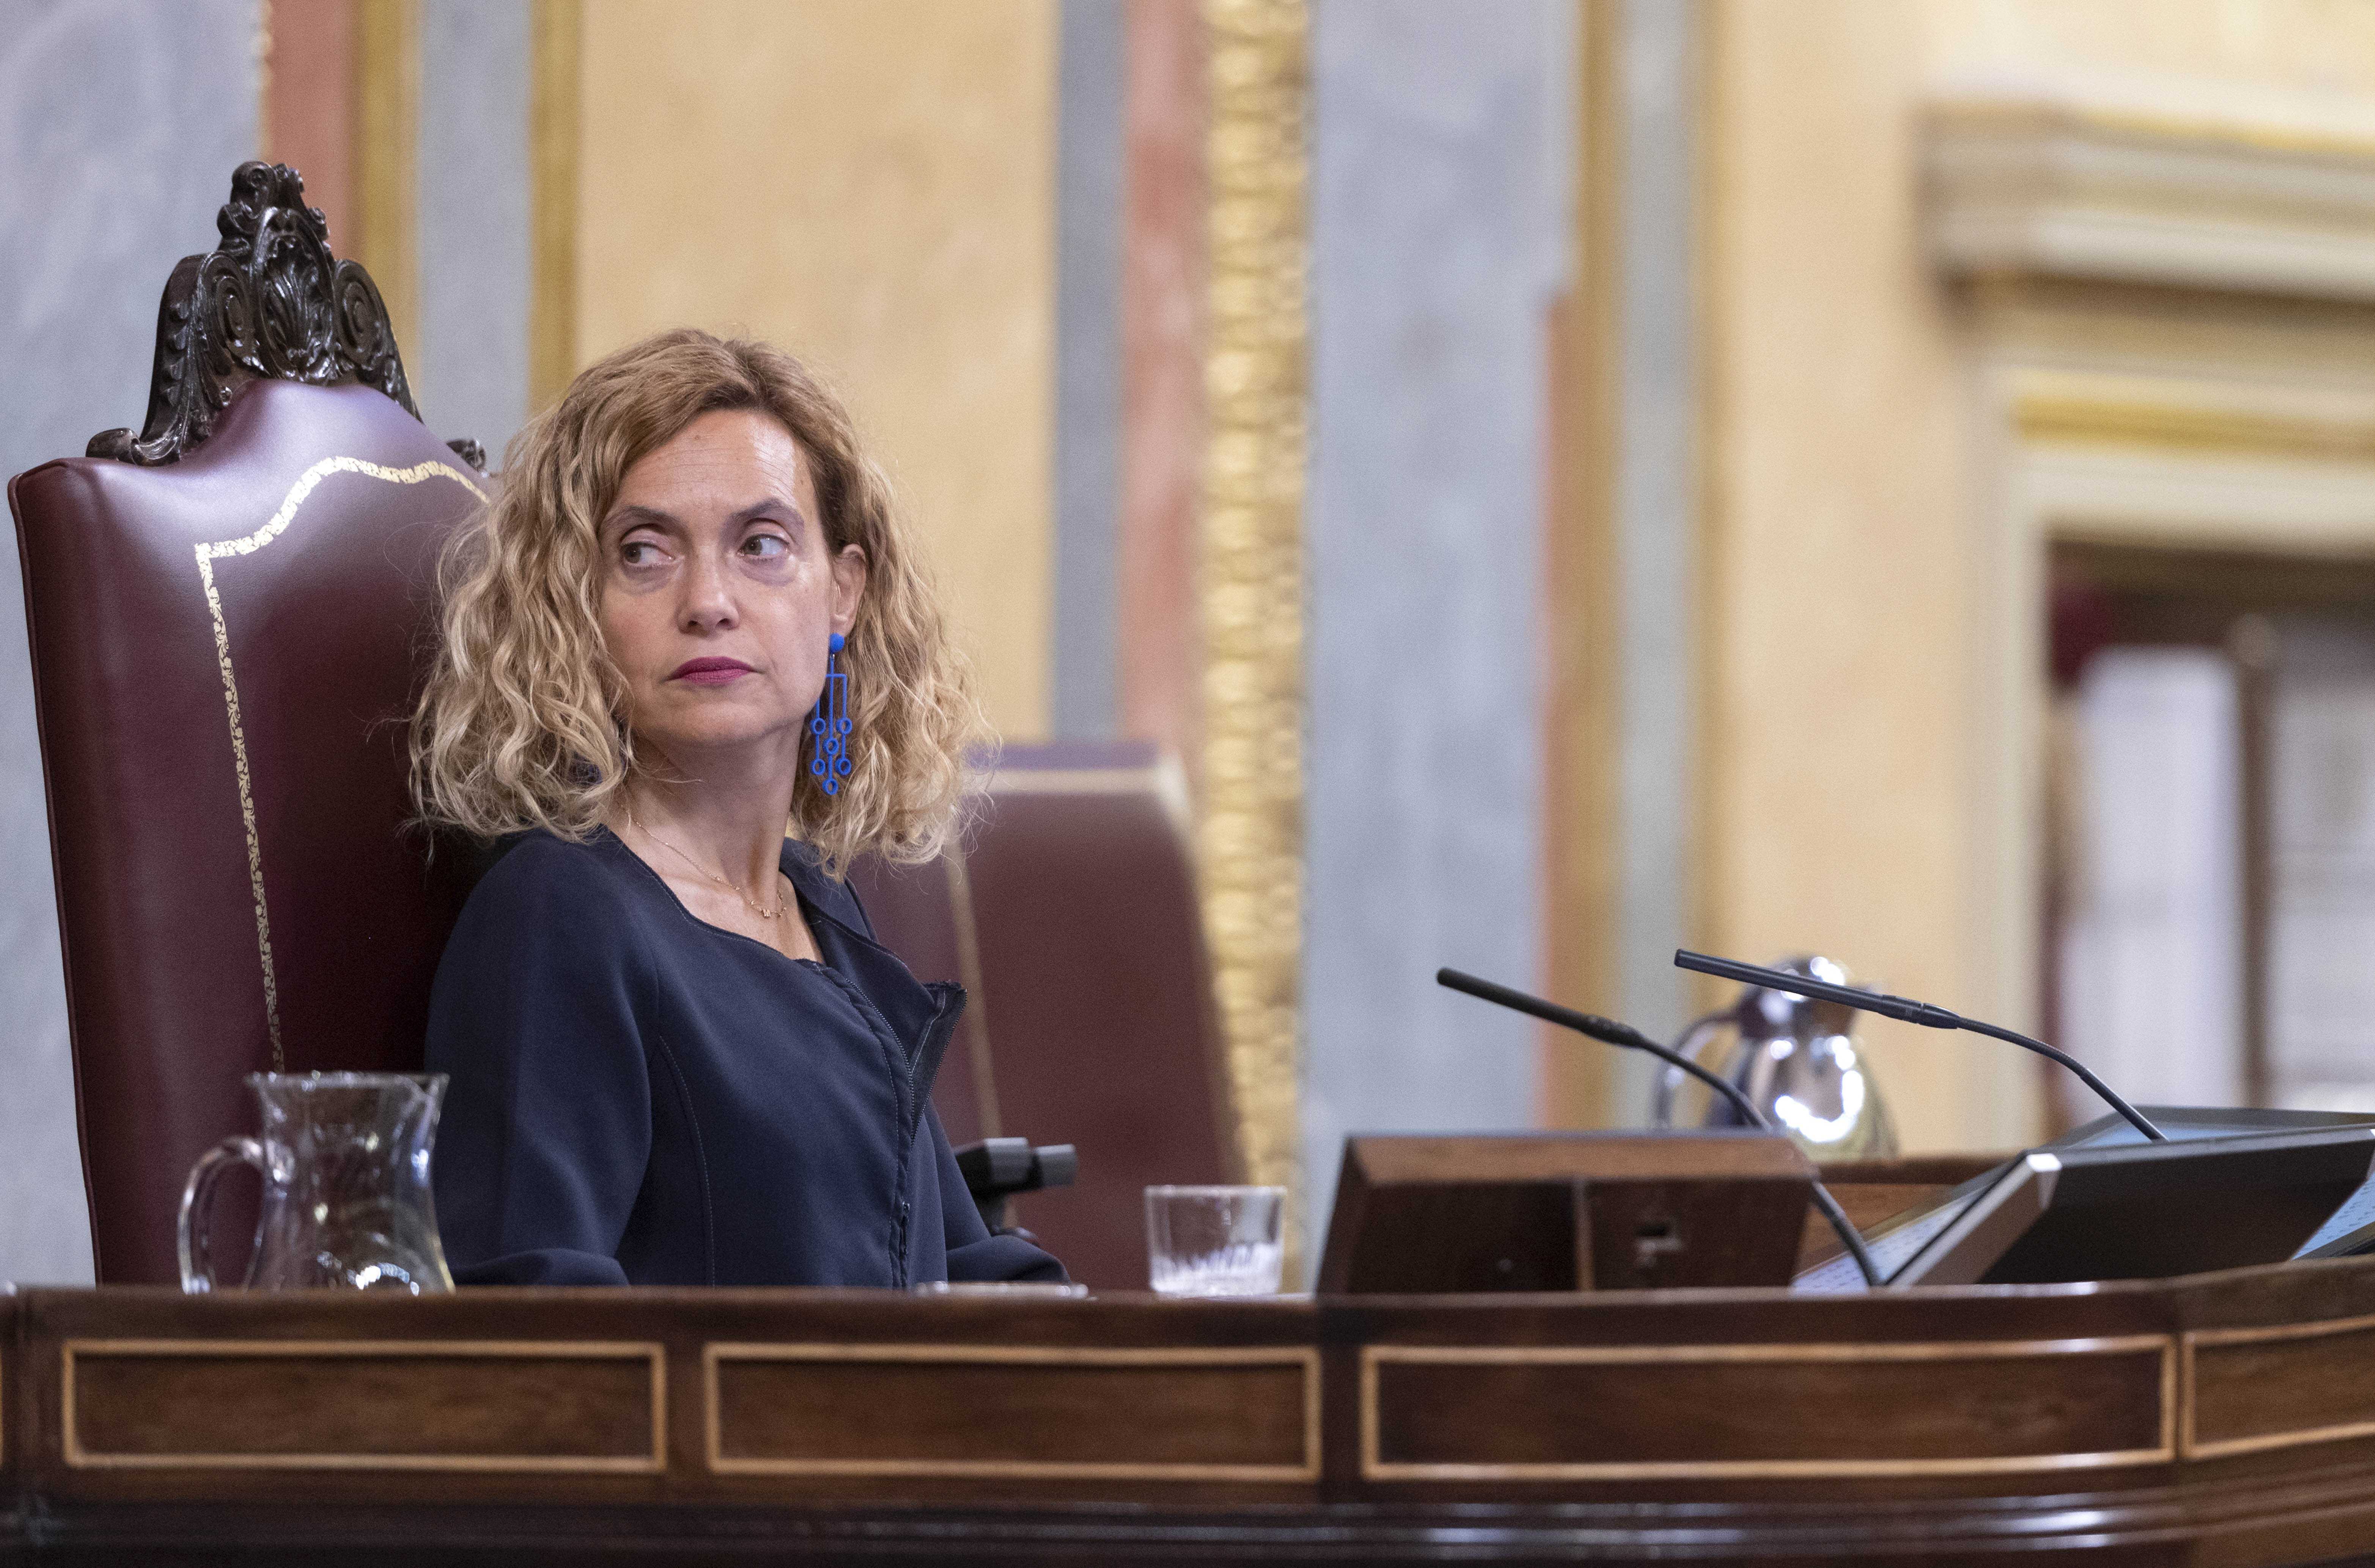 Meritxell Batet, speaker of Spanish Congress, steps aside and won't be a candidate on August 17th